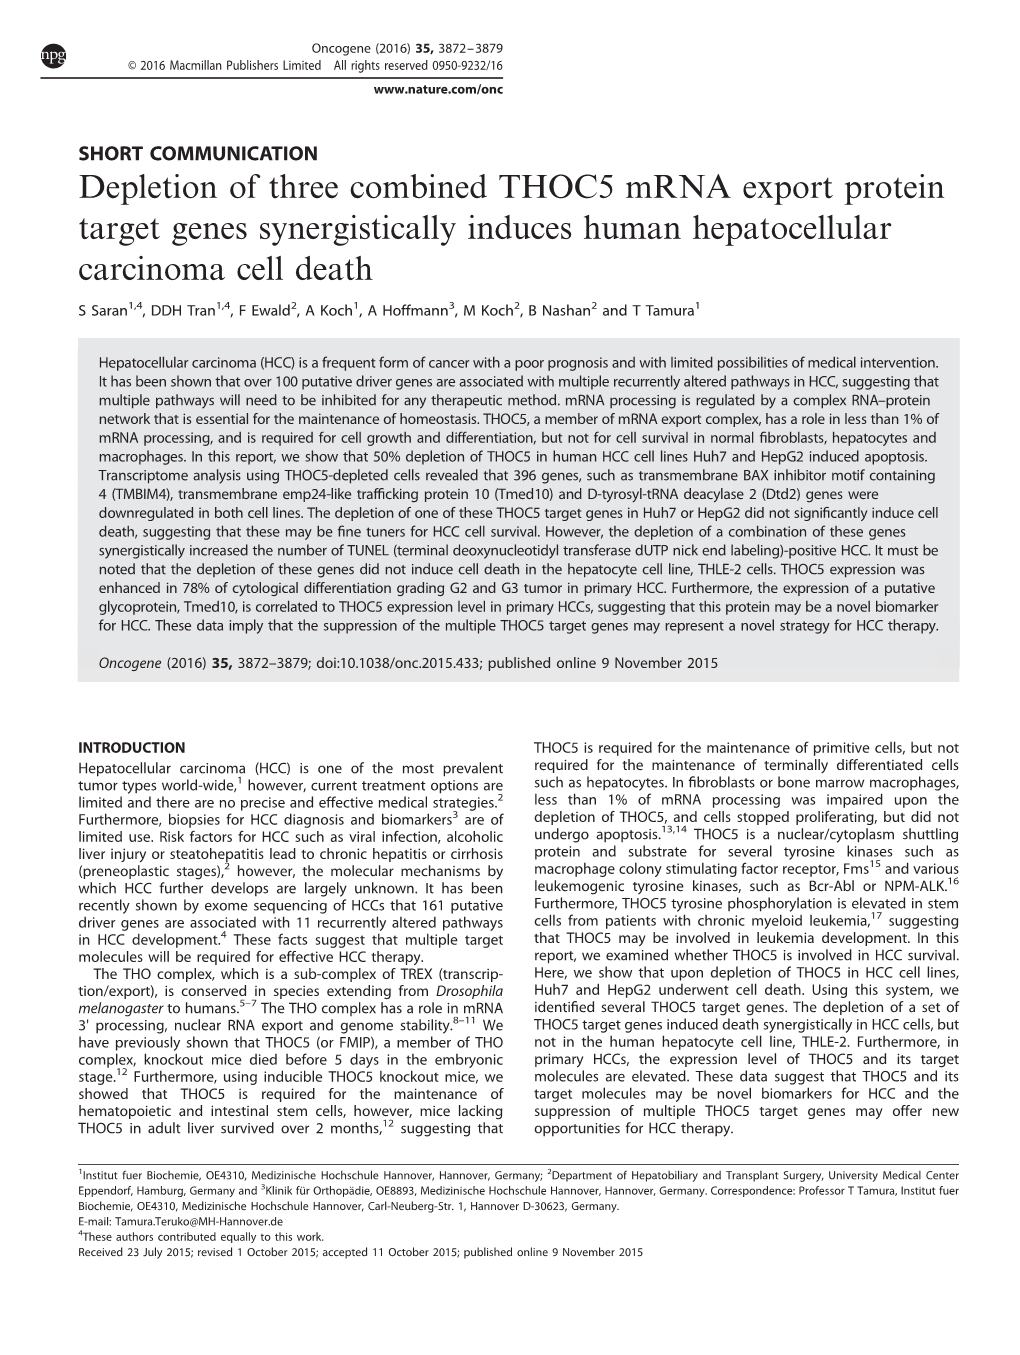 Depletion of Three Combined THOC5 Mrna Export Protein Target Genes Synergistically Induces Human Hepatocellular Carcinoma Cell Death